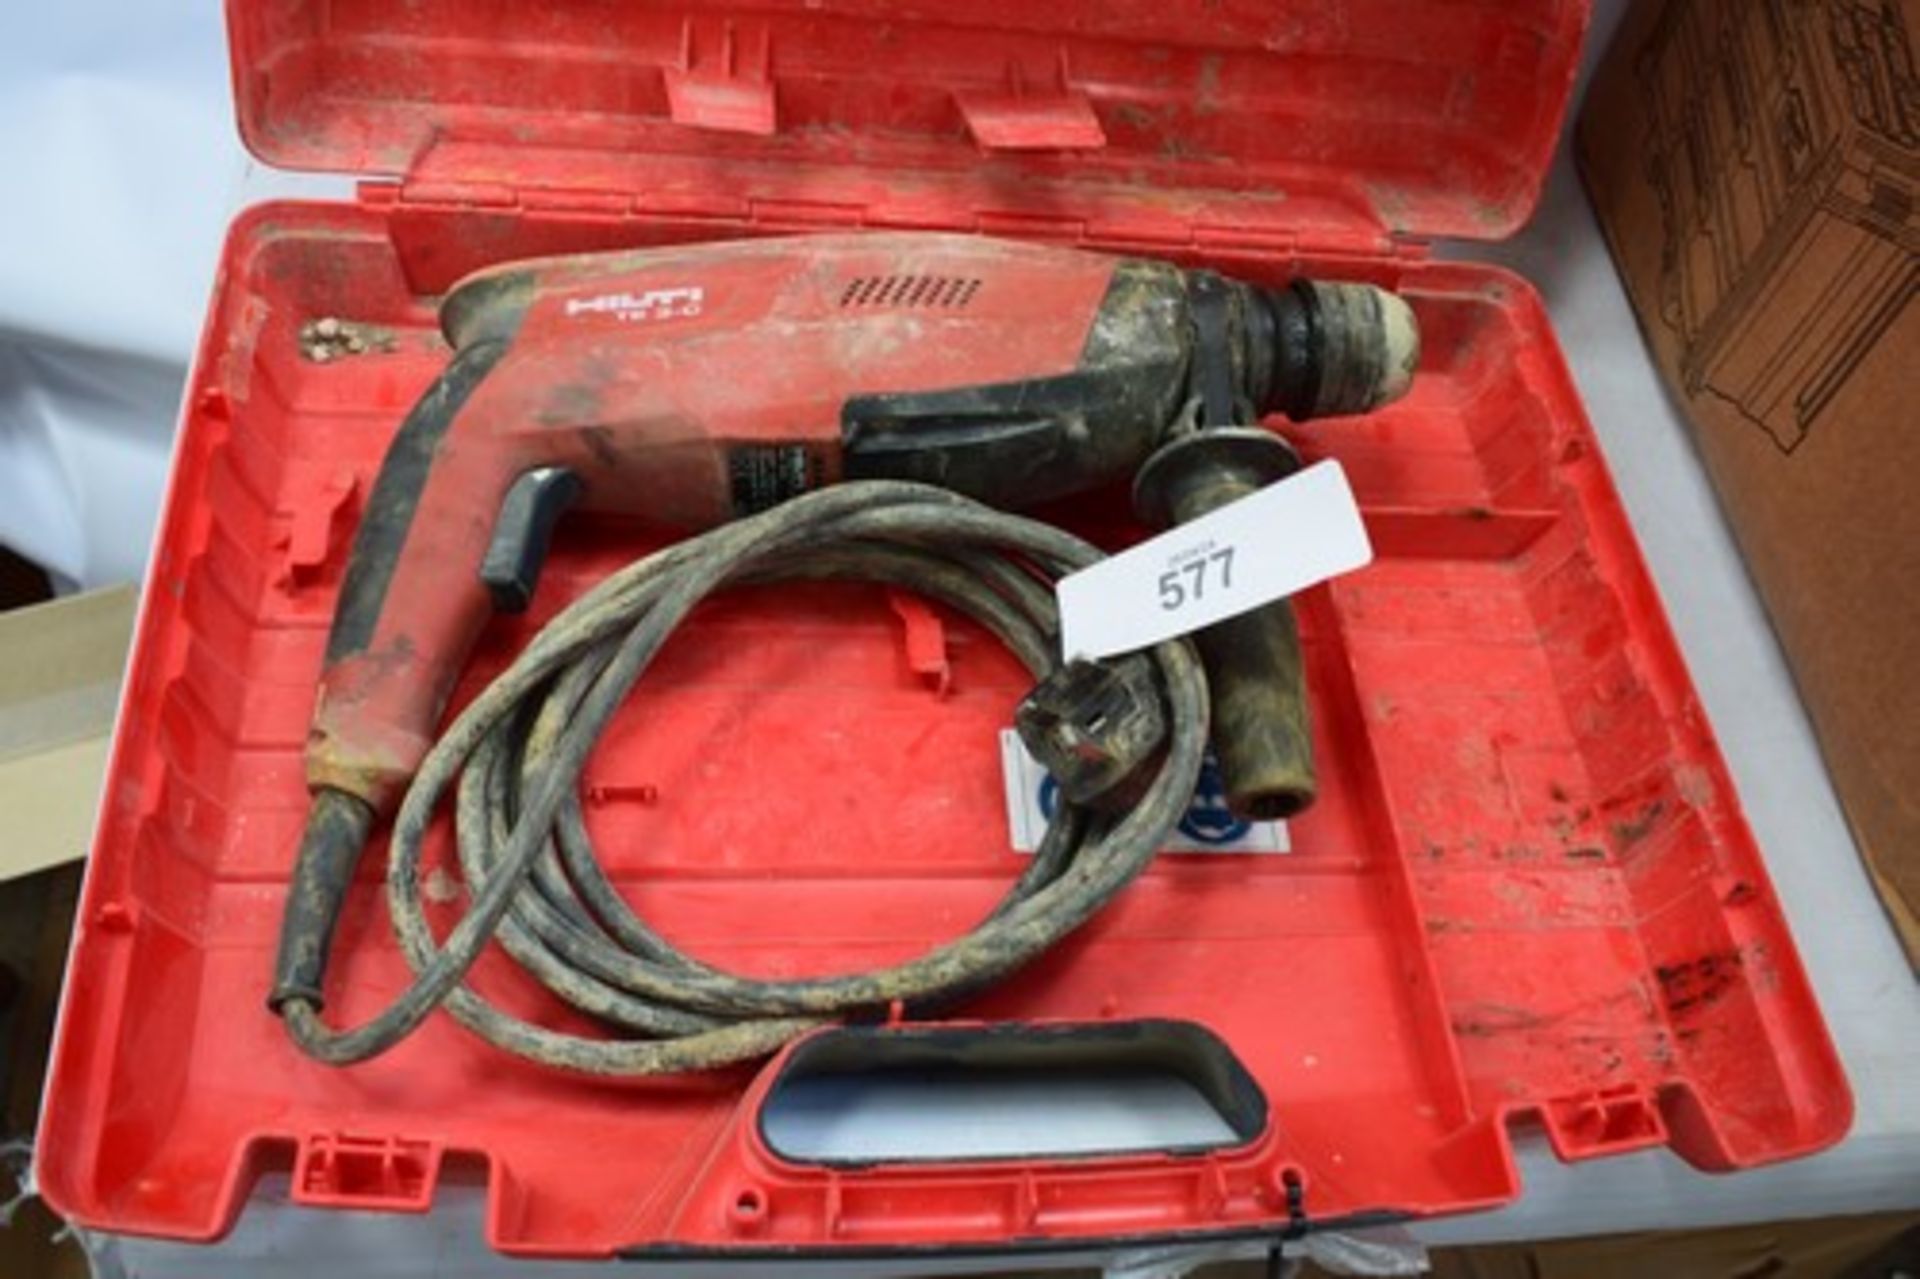 1 x Hilti TE 17 electric drill 110v-450w with original carry case - second-hand (SW) - Image 2 of 2